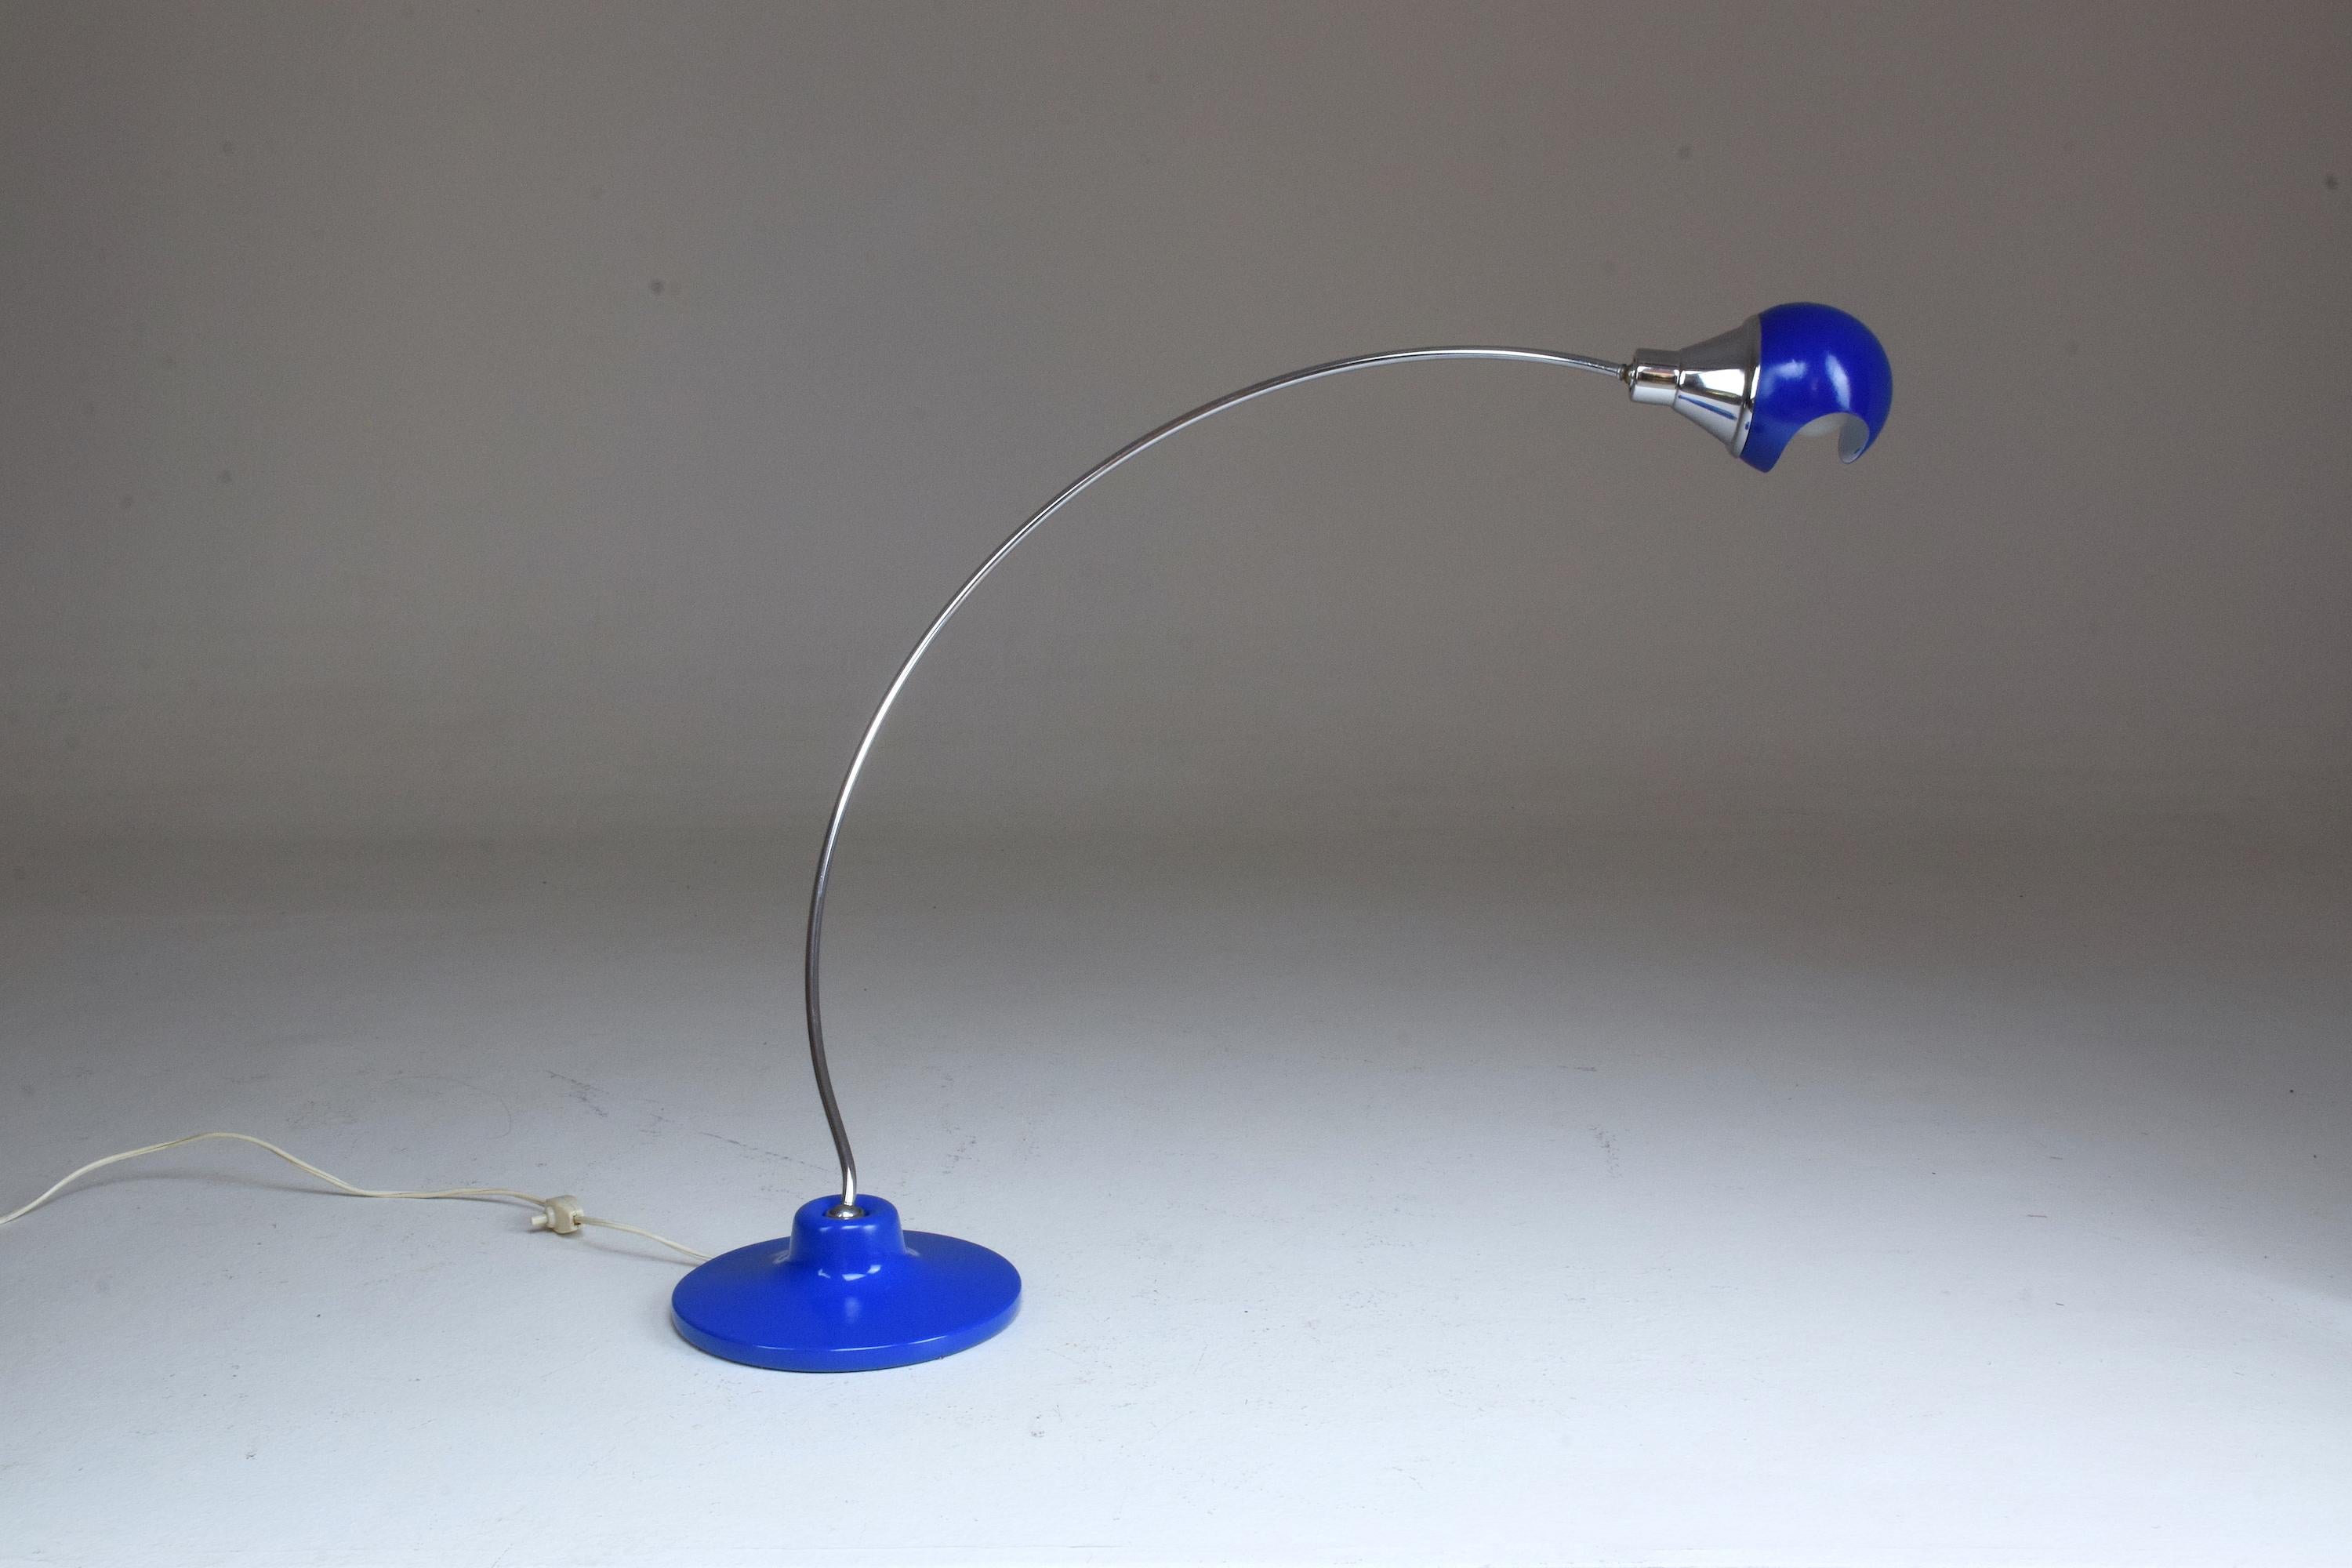 A big Italian vintage table lamp from the 1970s in Paolo Tilche style and fully restored condition composed of blue lacquer, nickeled brass and aluminum. It articulates at the base and at the shade. 

Wiring is professionally checked.
E27 and E26